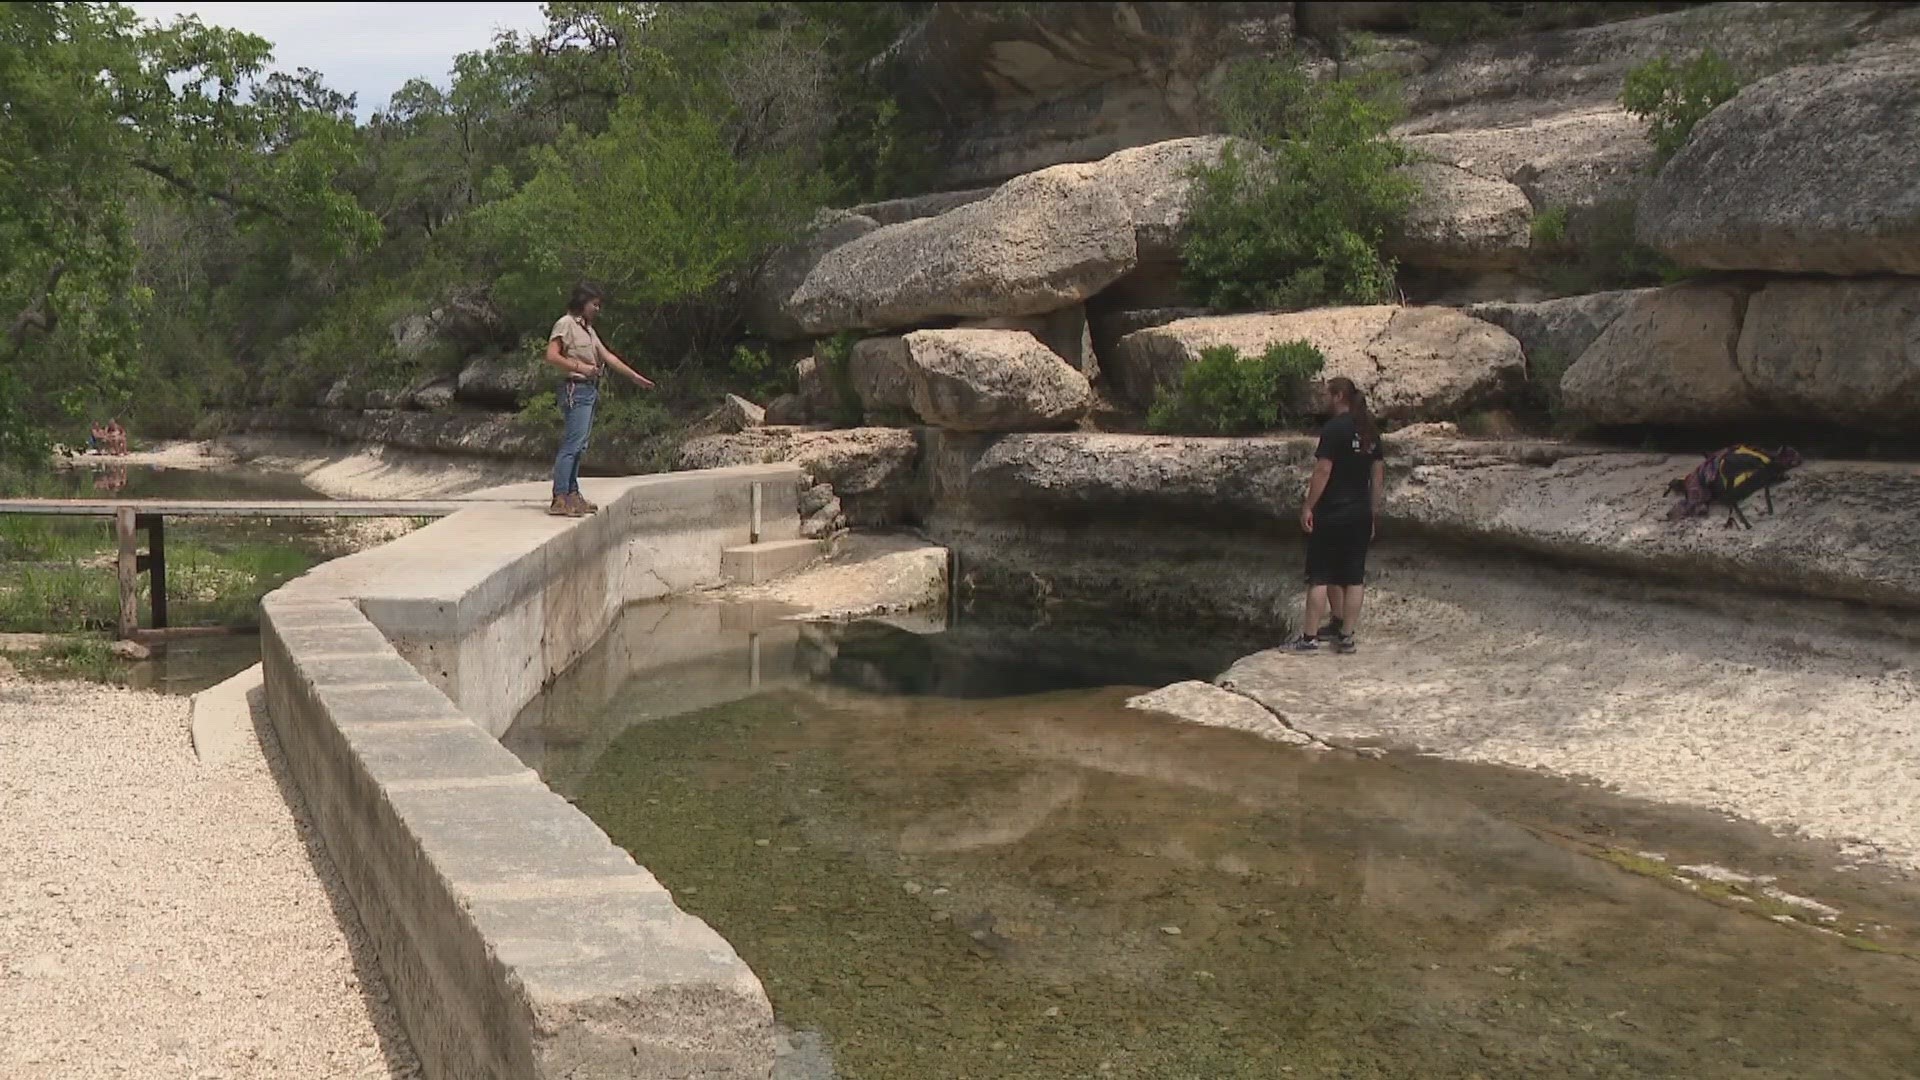 One of the most popular swimming spots in Central Texas is still off-limits.